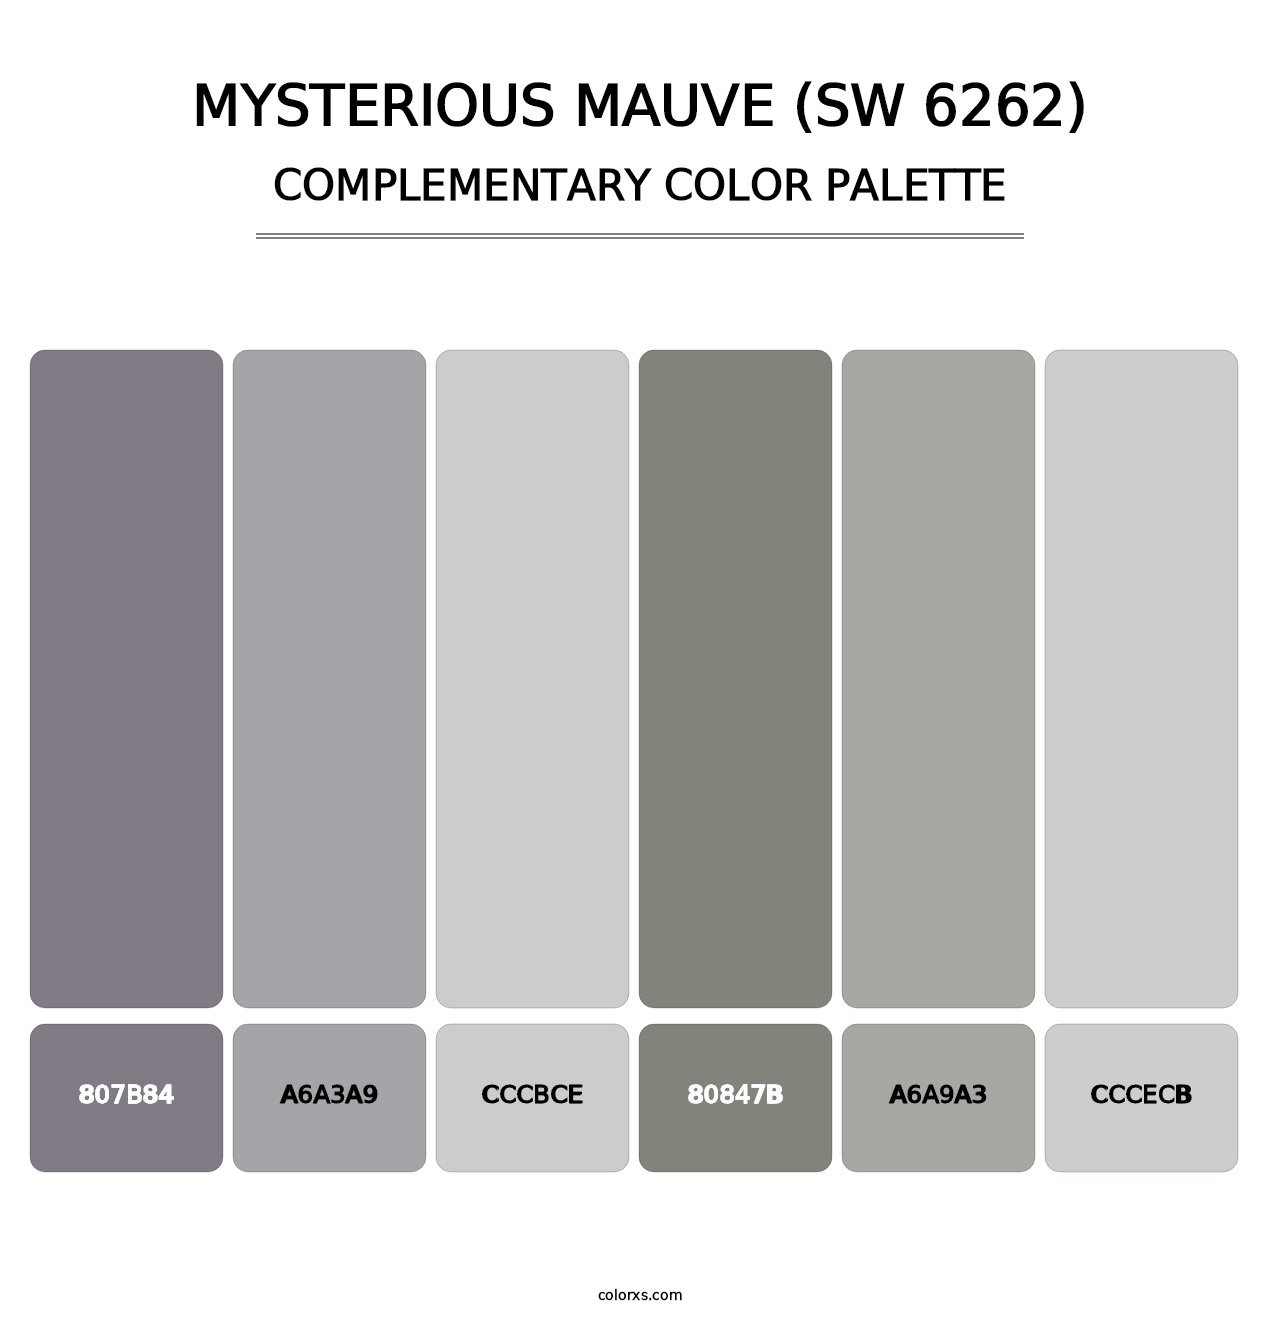 Mysterious Mauve (SW 6262) - Complementary Color Palette